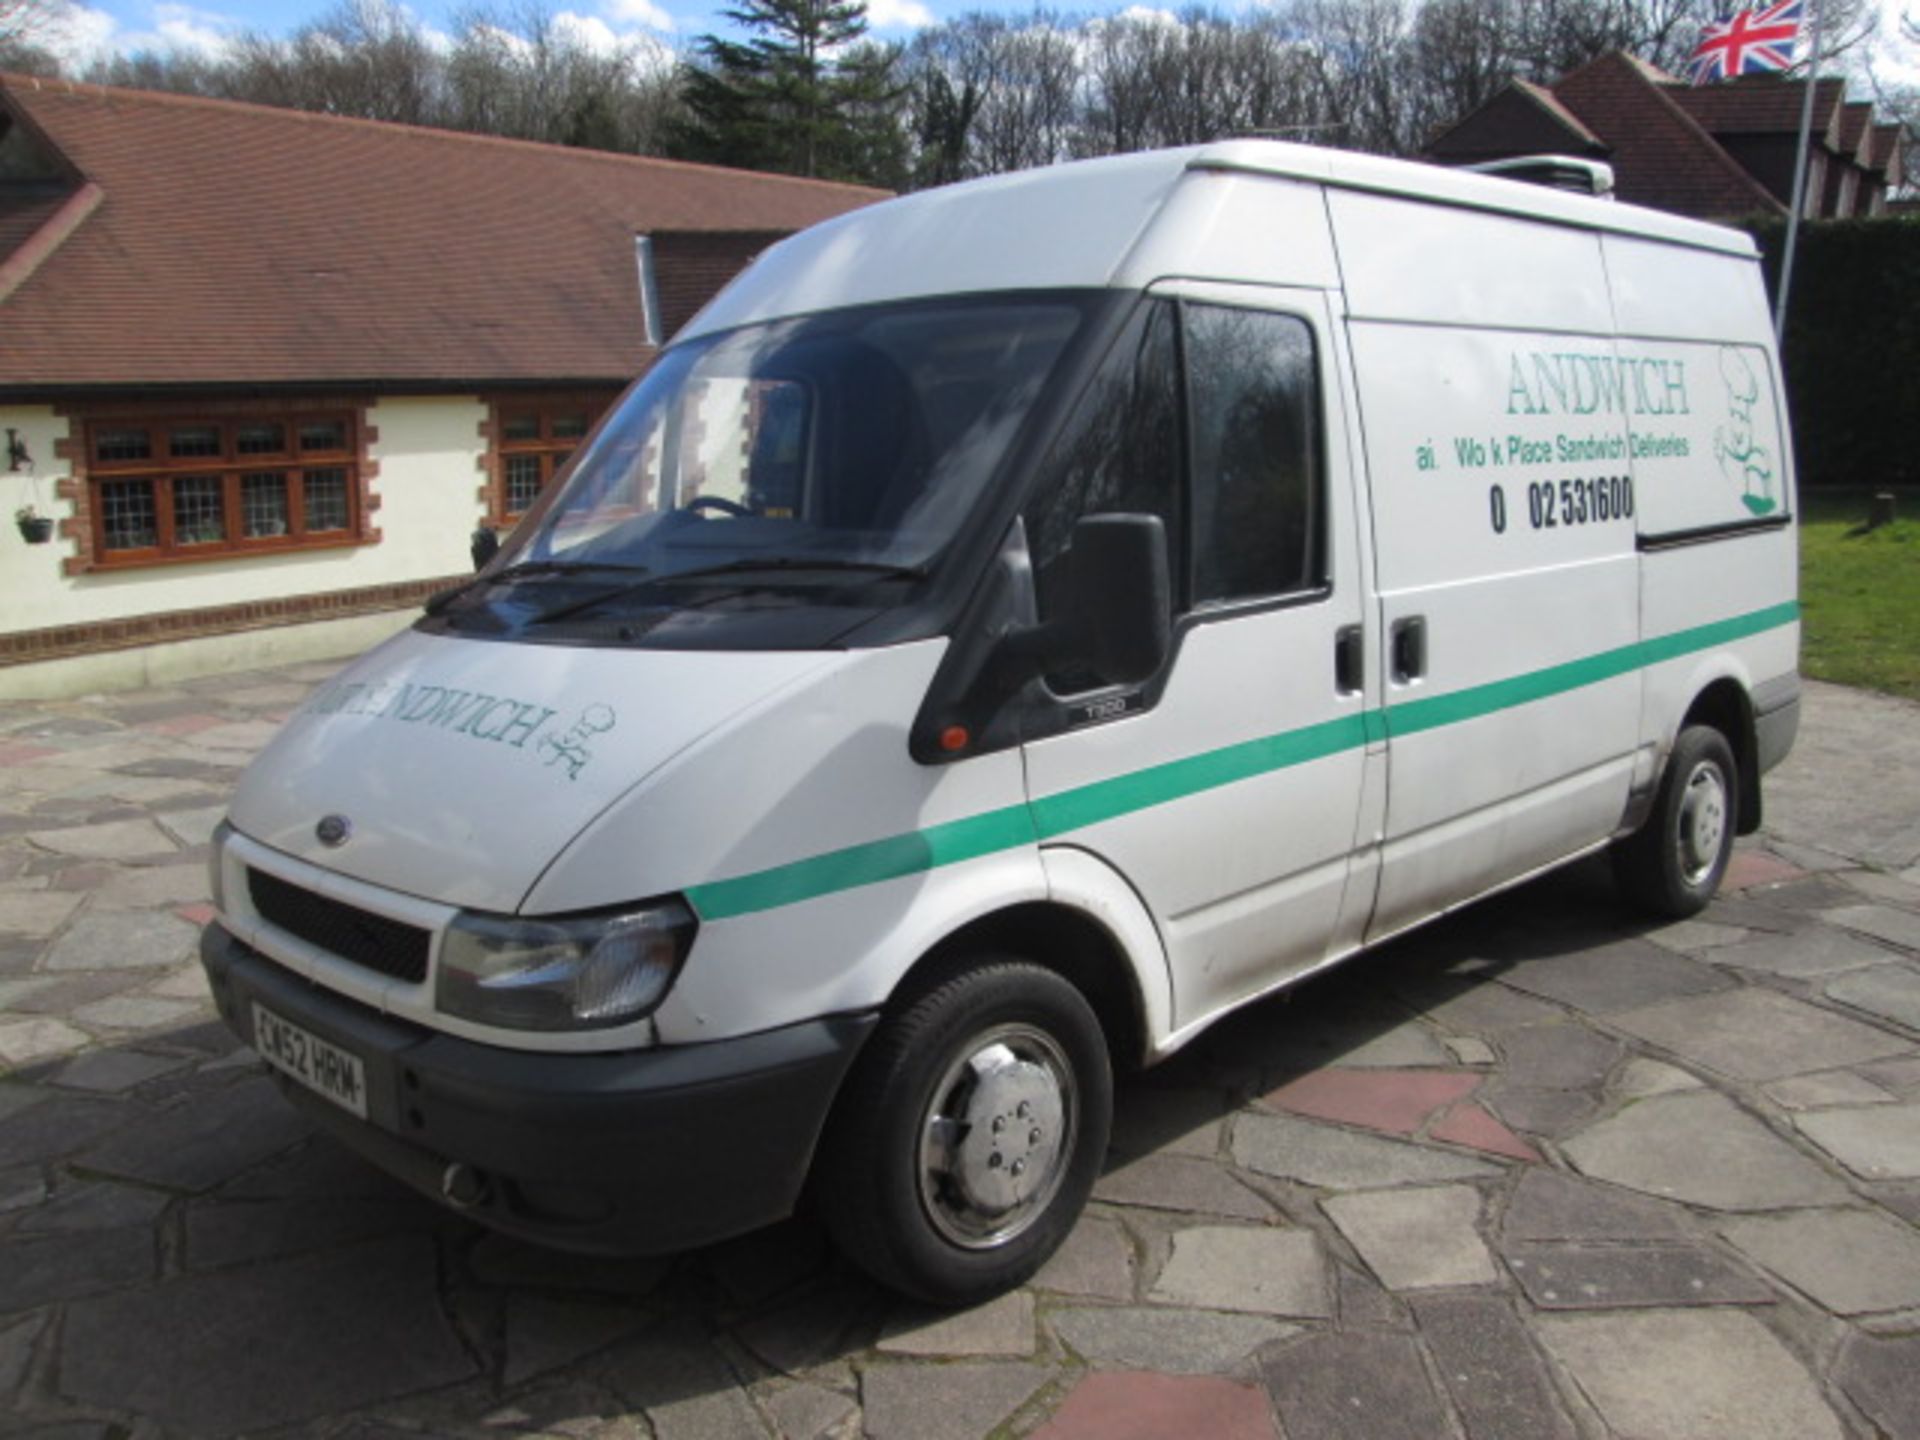 CW52 HRM - Ford Transit 300 MWB TD Panel Van with Xarios 200 Refrigeration Plant Fitted.